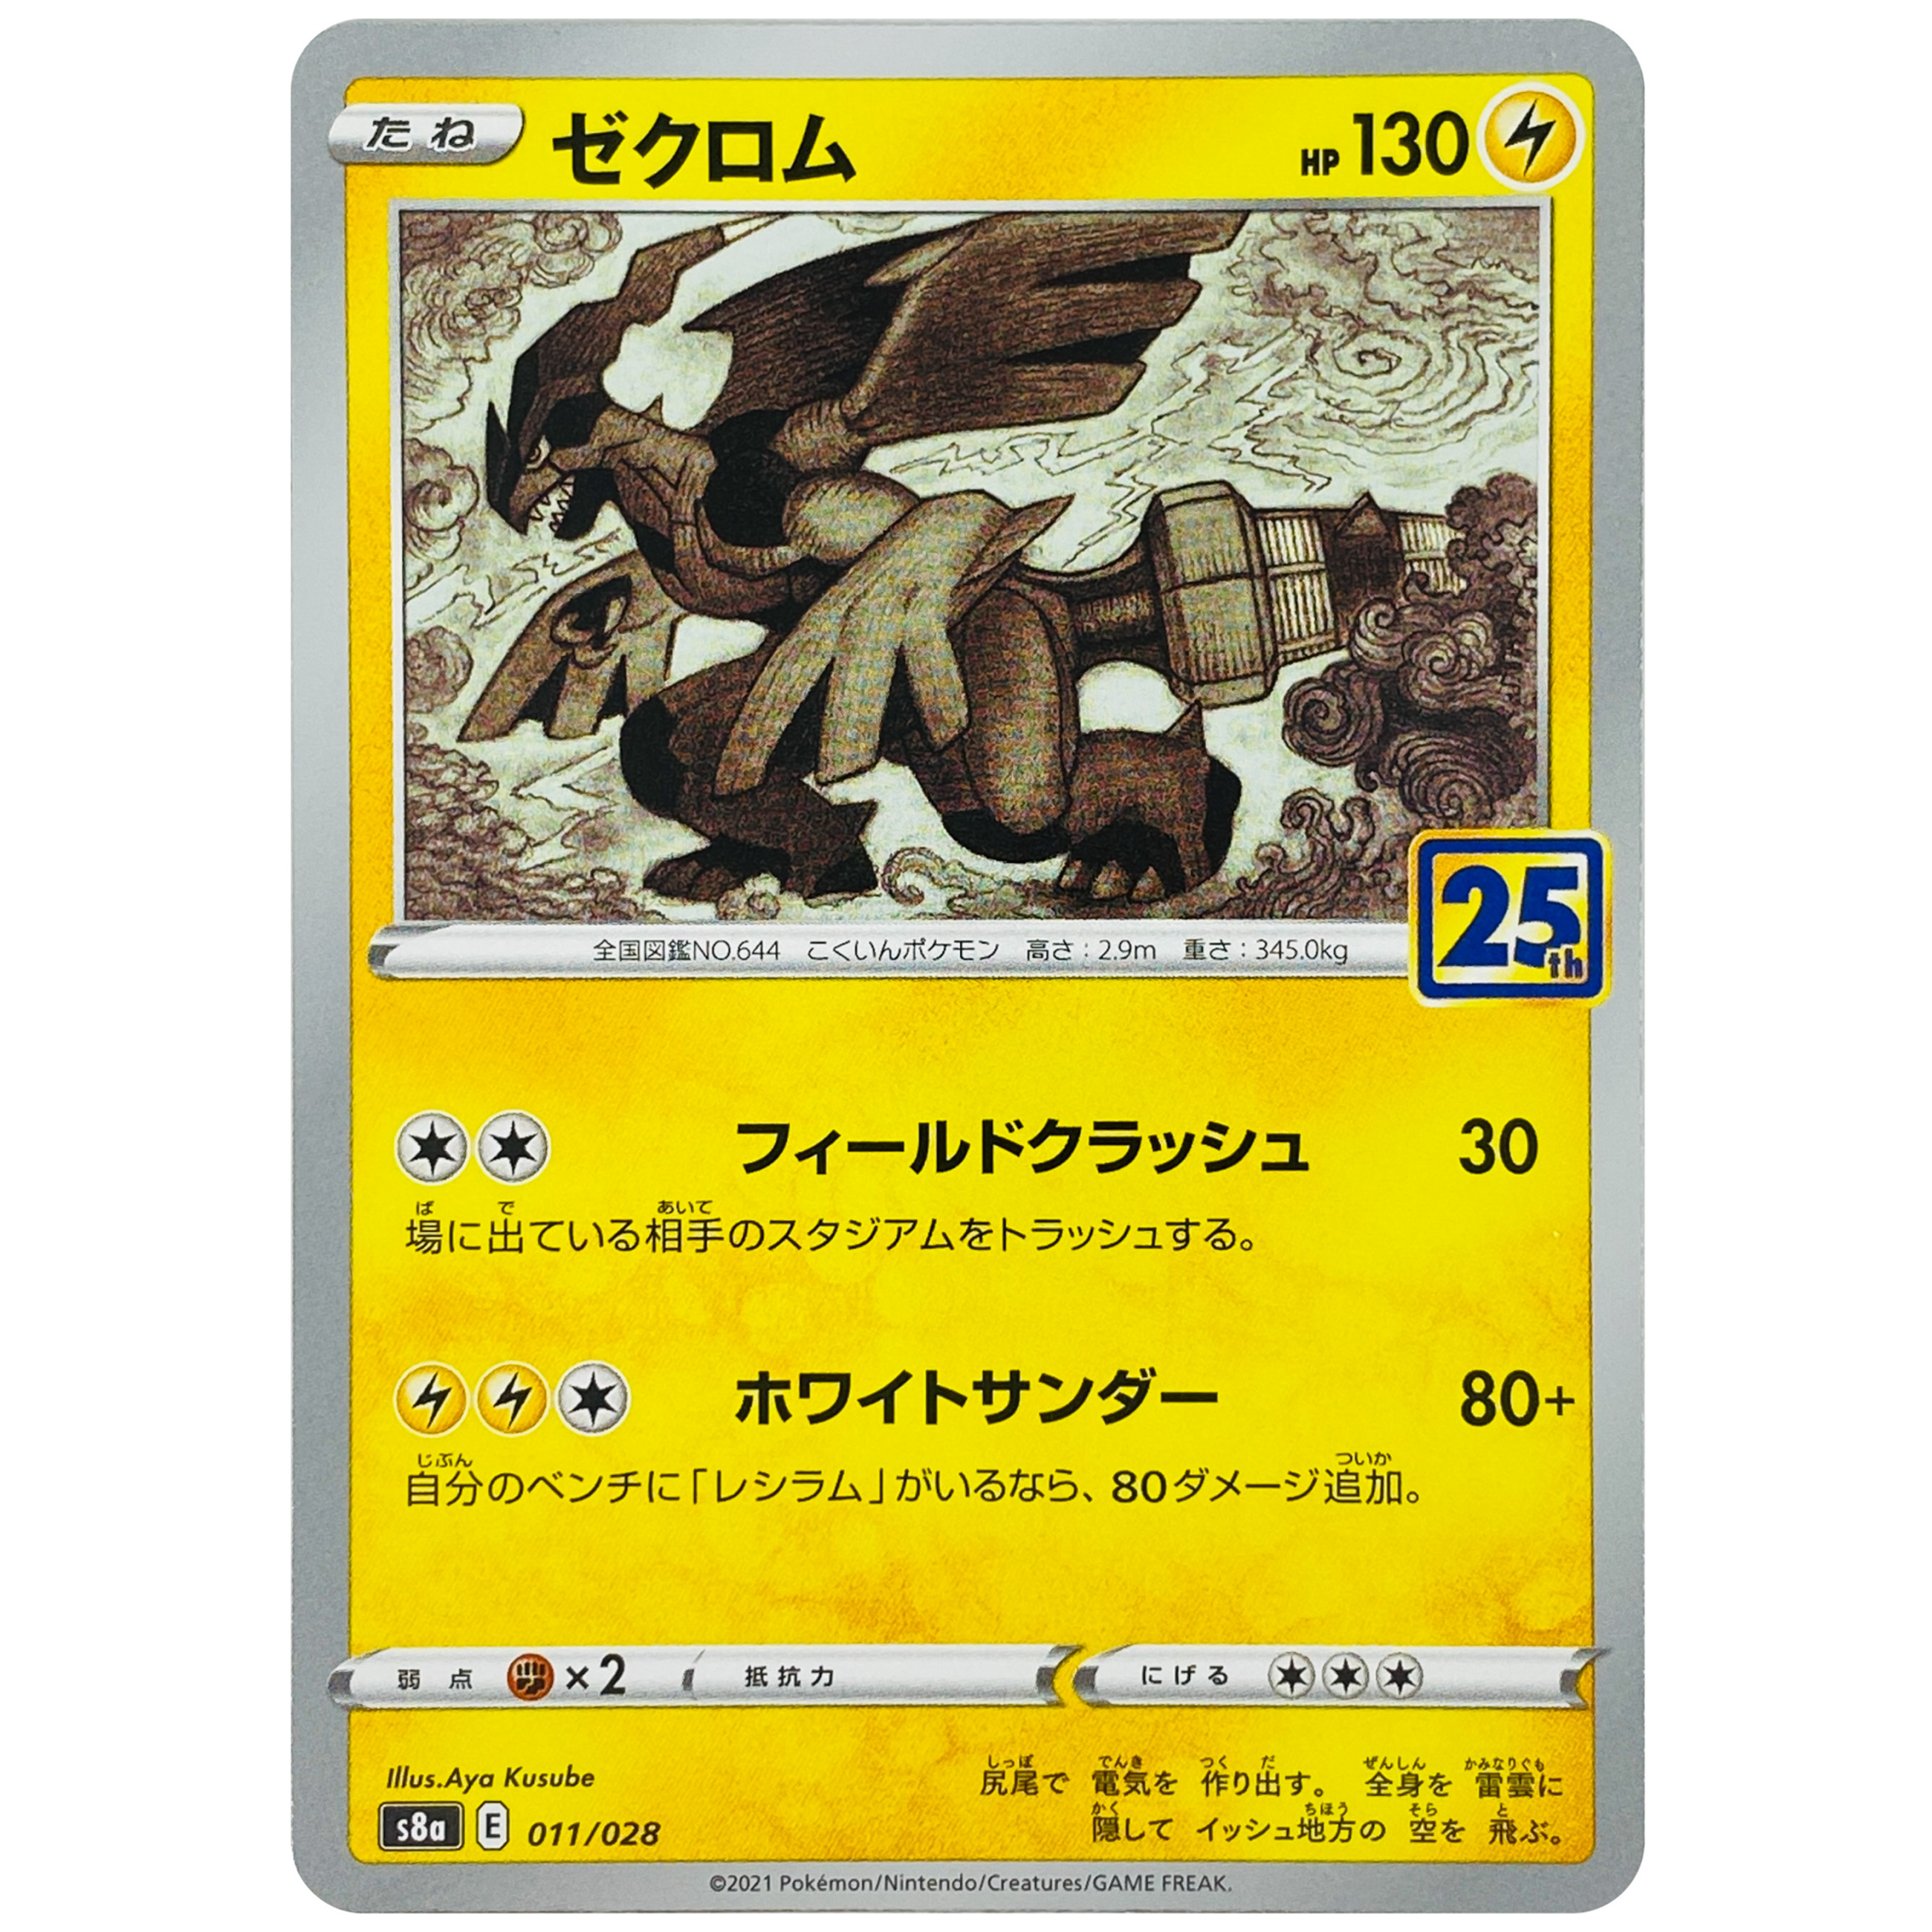 Zekrom 011/028 S8a 25th Anniversary Collection - Pokemon Card Japanese